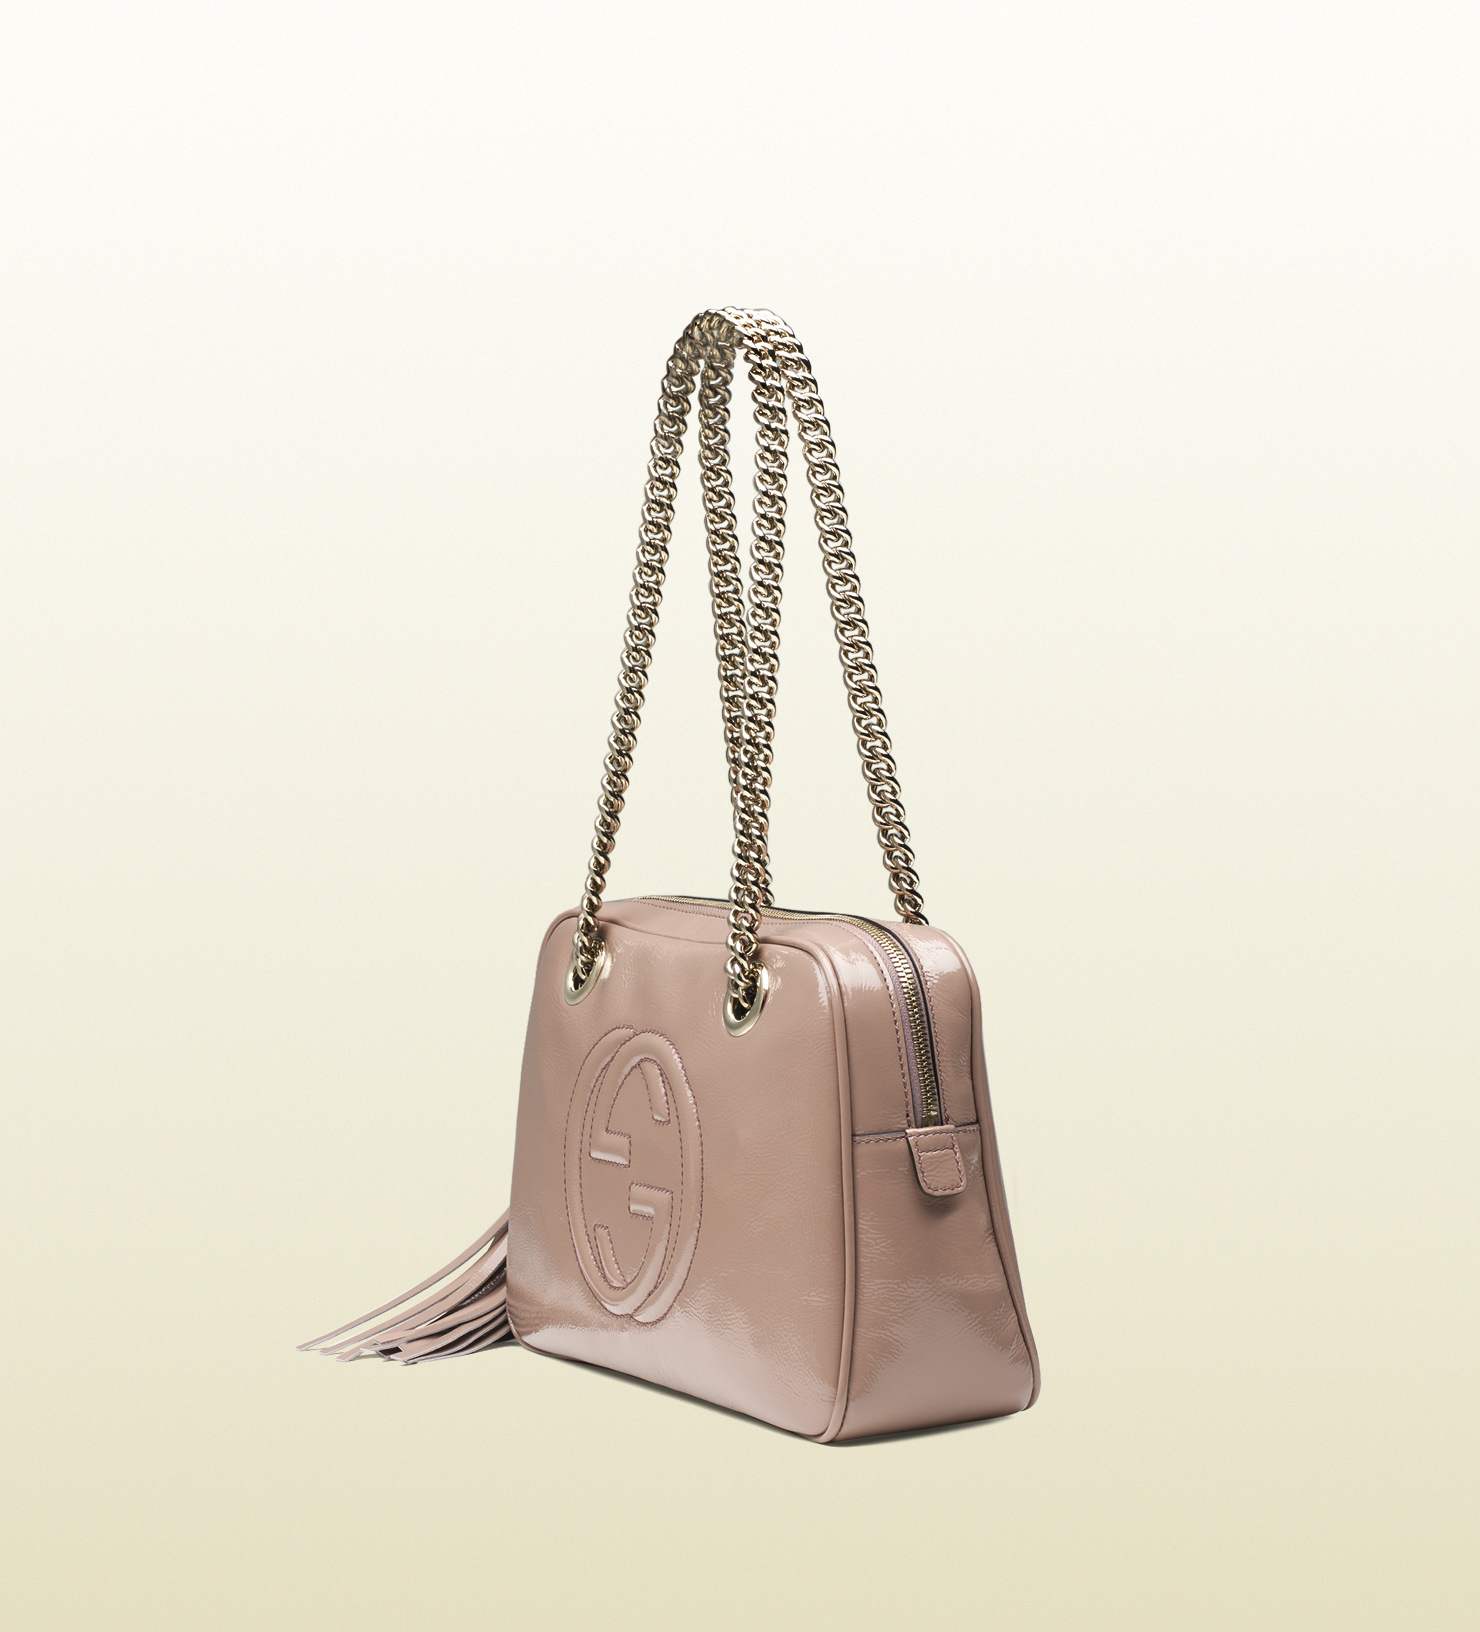 Gucci Soho Patent Leather Shoulder Bag in Pink - Lyst